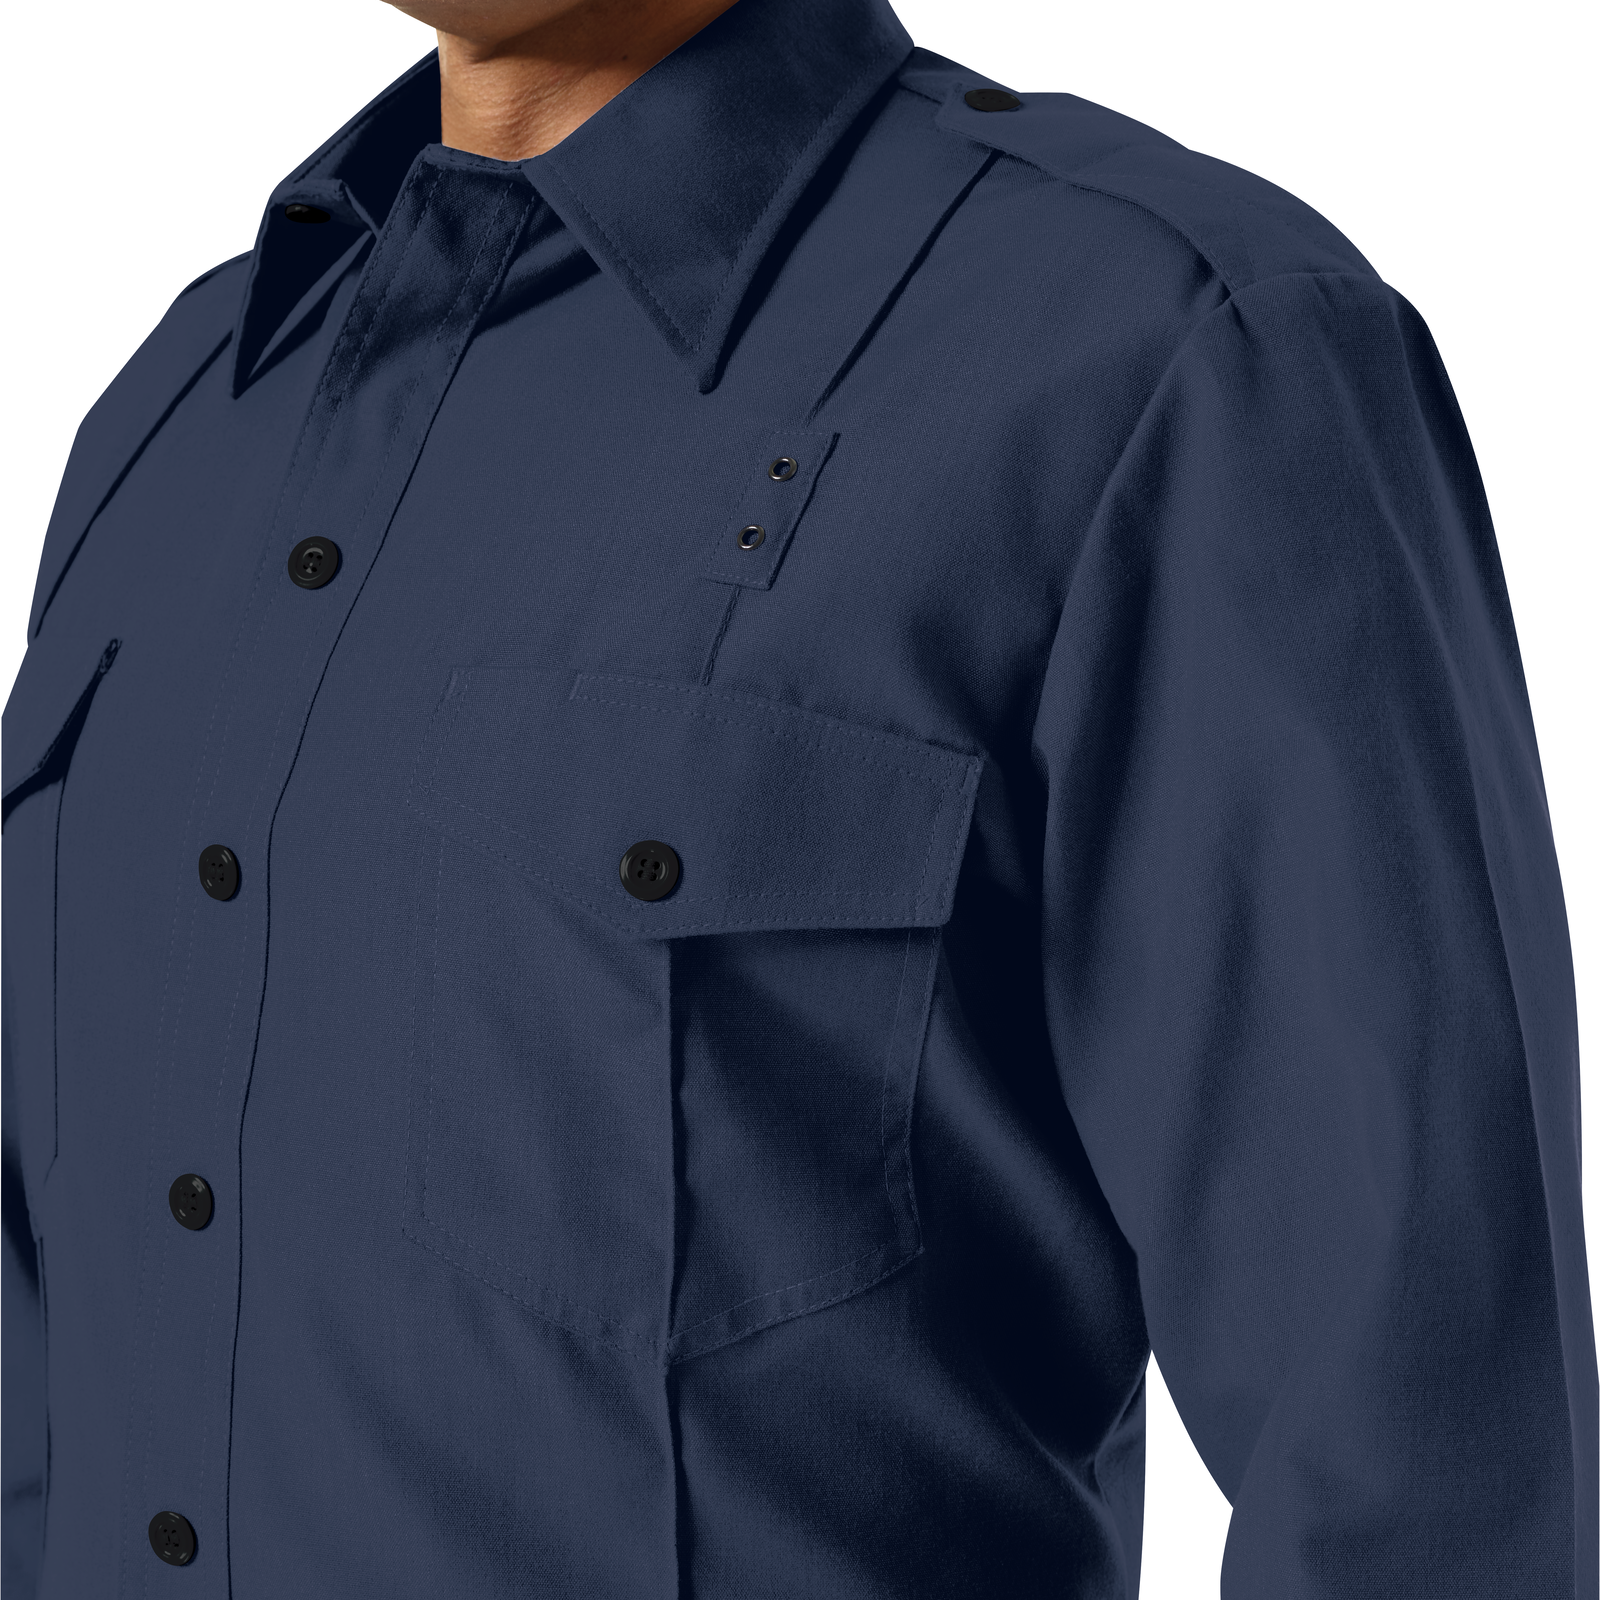 Workrite Class Long Sleeve Fire Chef Shirt (FSC0) | Fire Store | Fuego Fire Center | Firefighter Gear | Made with durable, flame-resistant Nomex® IIIA fabric and autoclaved with our proprietary PerfectPress® process to give you a professional appearance that lasts. Featuring details like lined, banded collars and reinforced stitching, designed to support your needs.